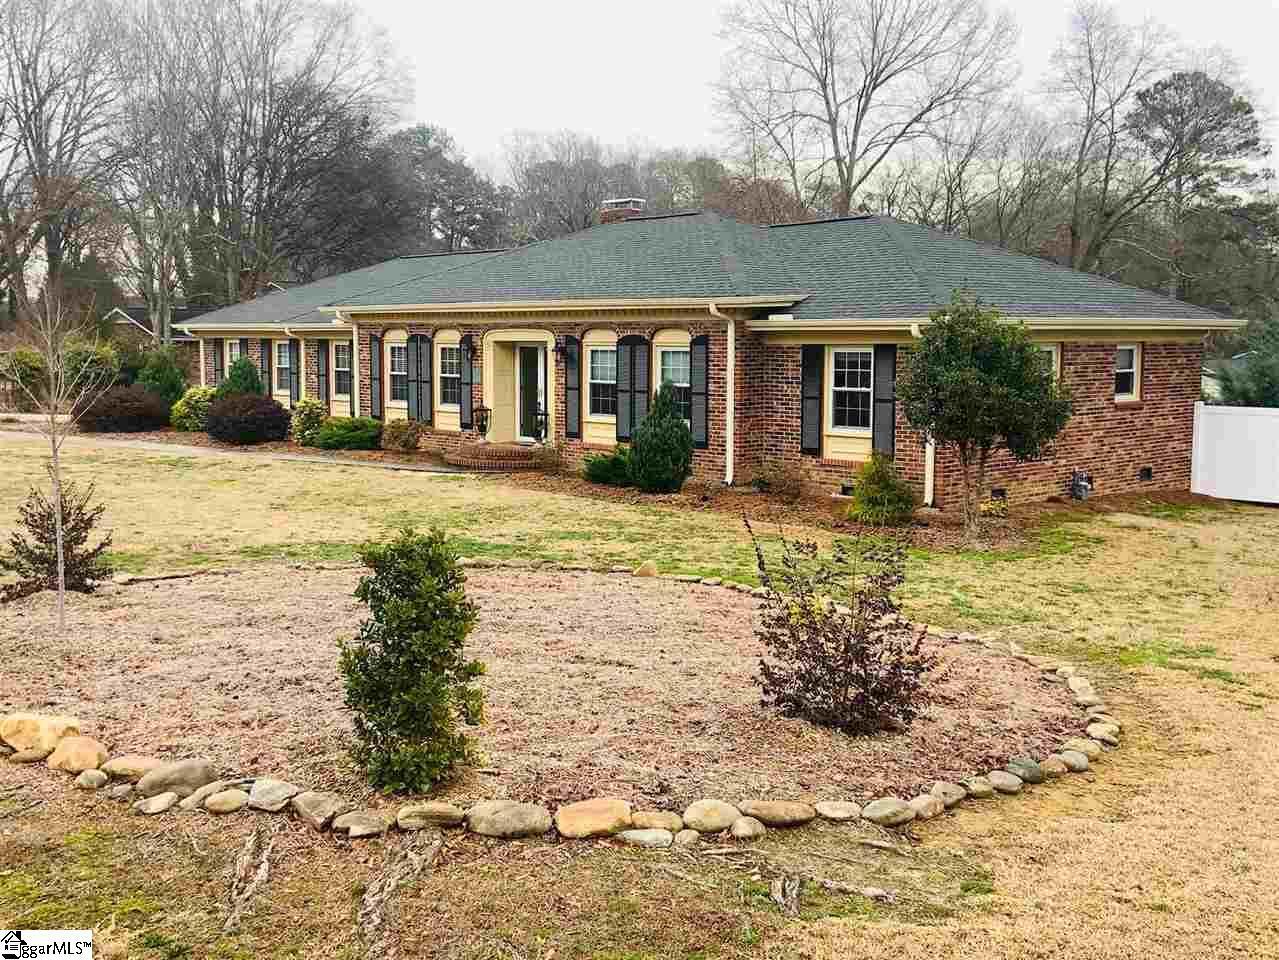 homes for sale in pickens, sc